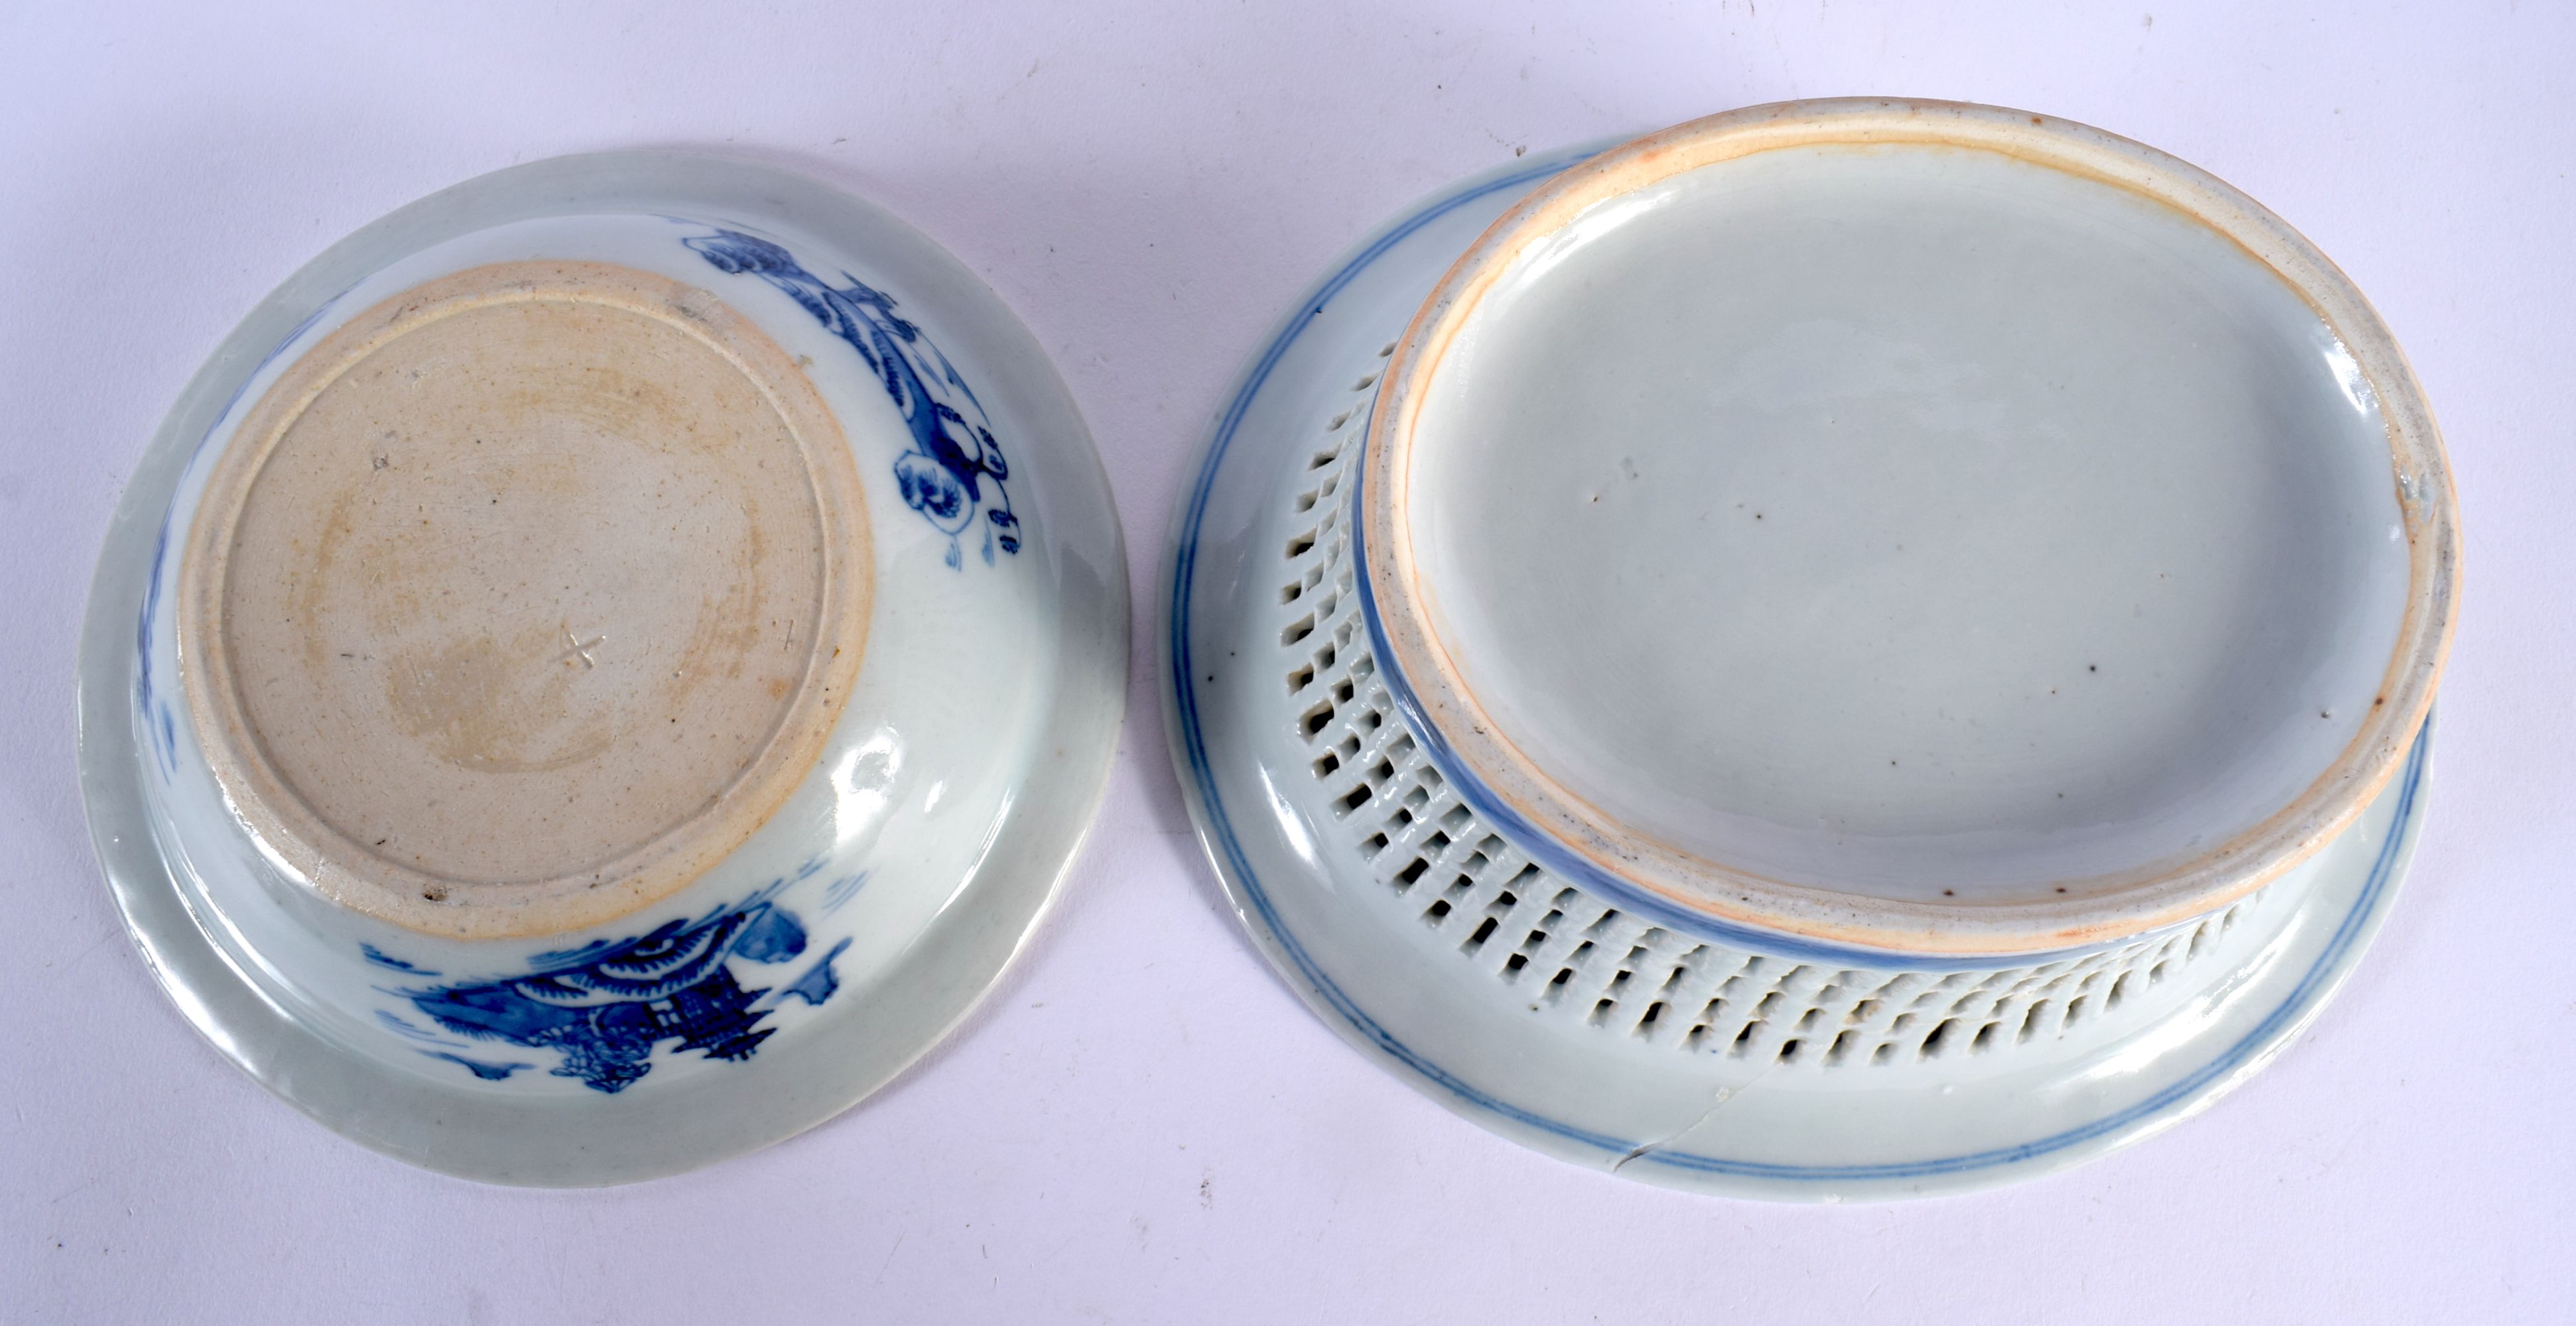 A LARGE 18TH CENTURY CHINESE EXPORT BLUE AND WHITE PORCELAIN DISH together with a basket & pudding b - Image 6 of 6